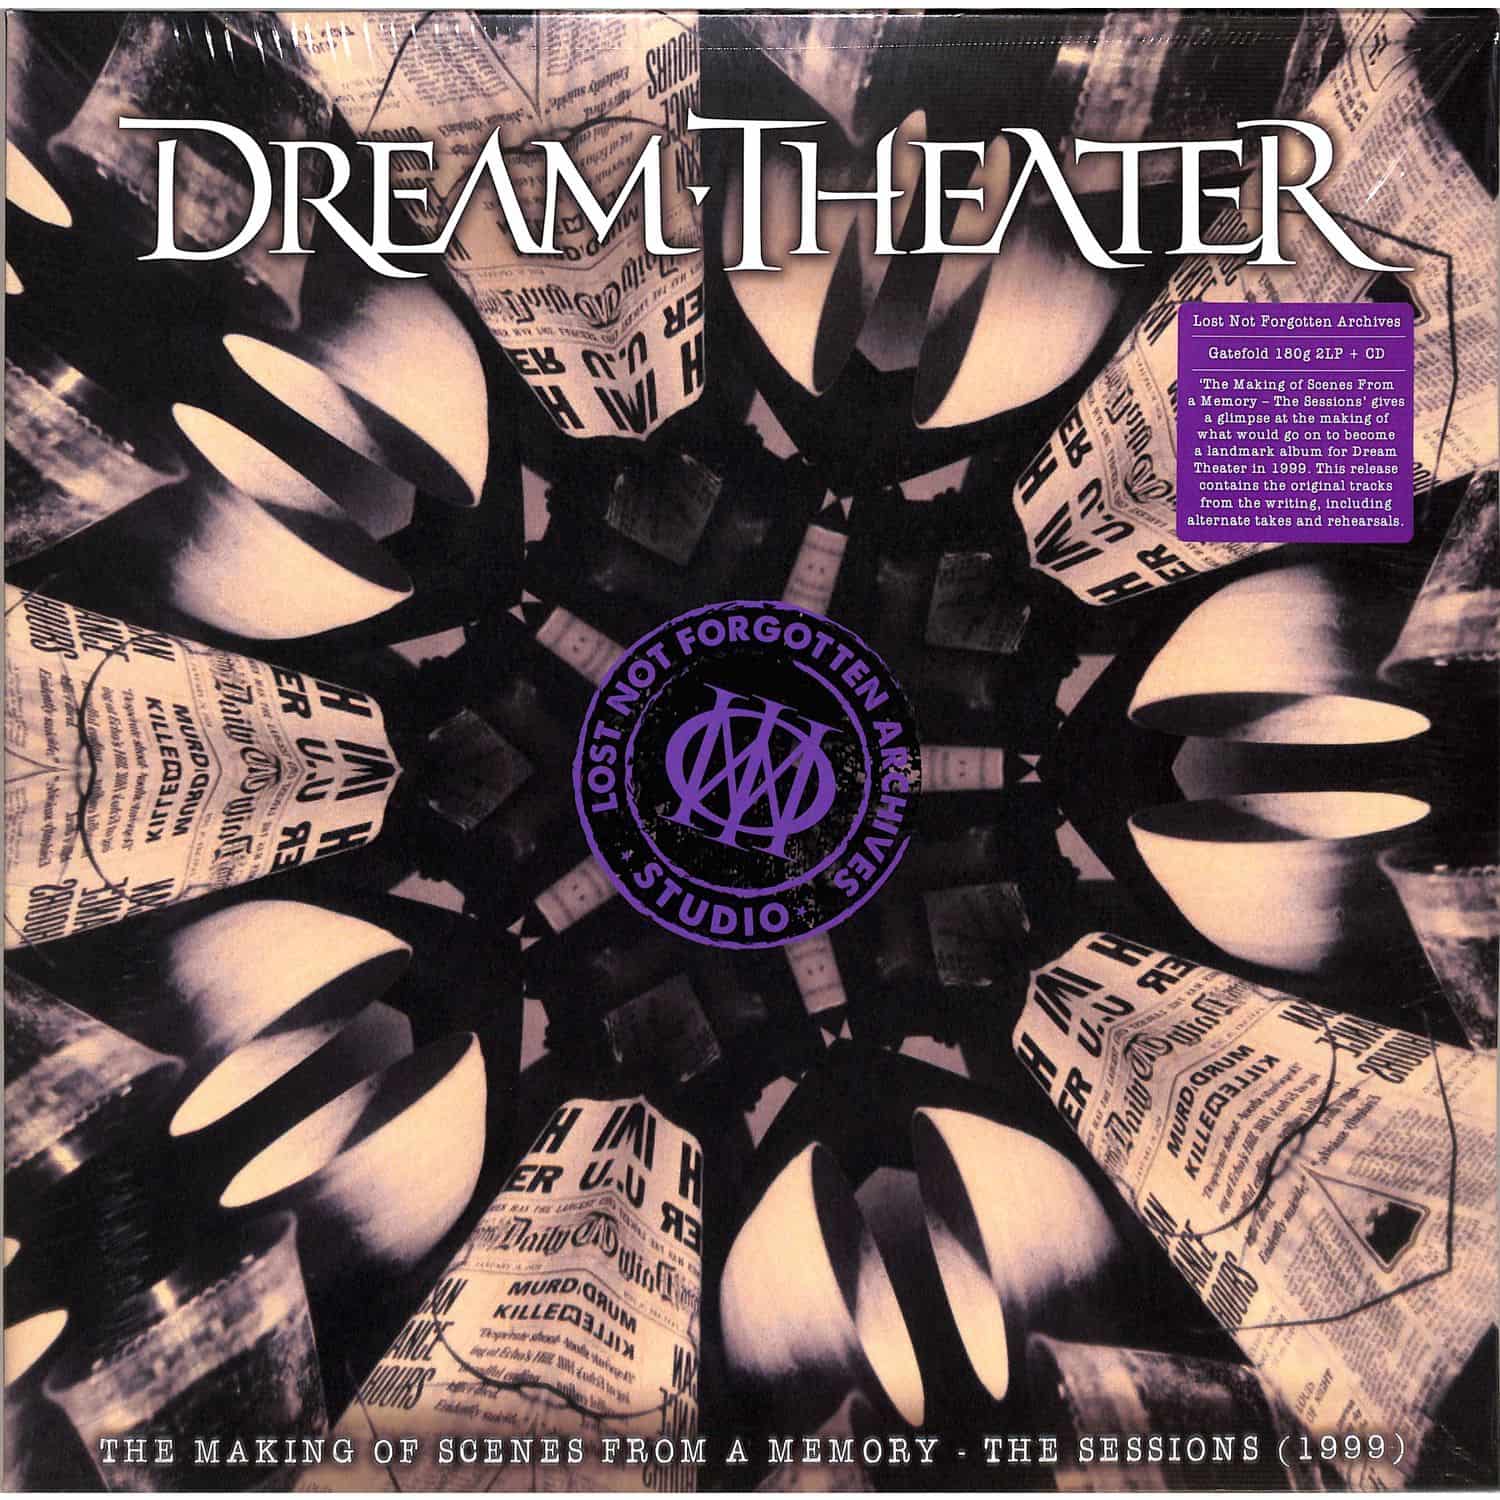 Dream Theater - LOST NOT FORGOTTEN ARCHIVES: THE MAKING OF SCENES